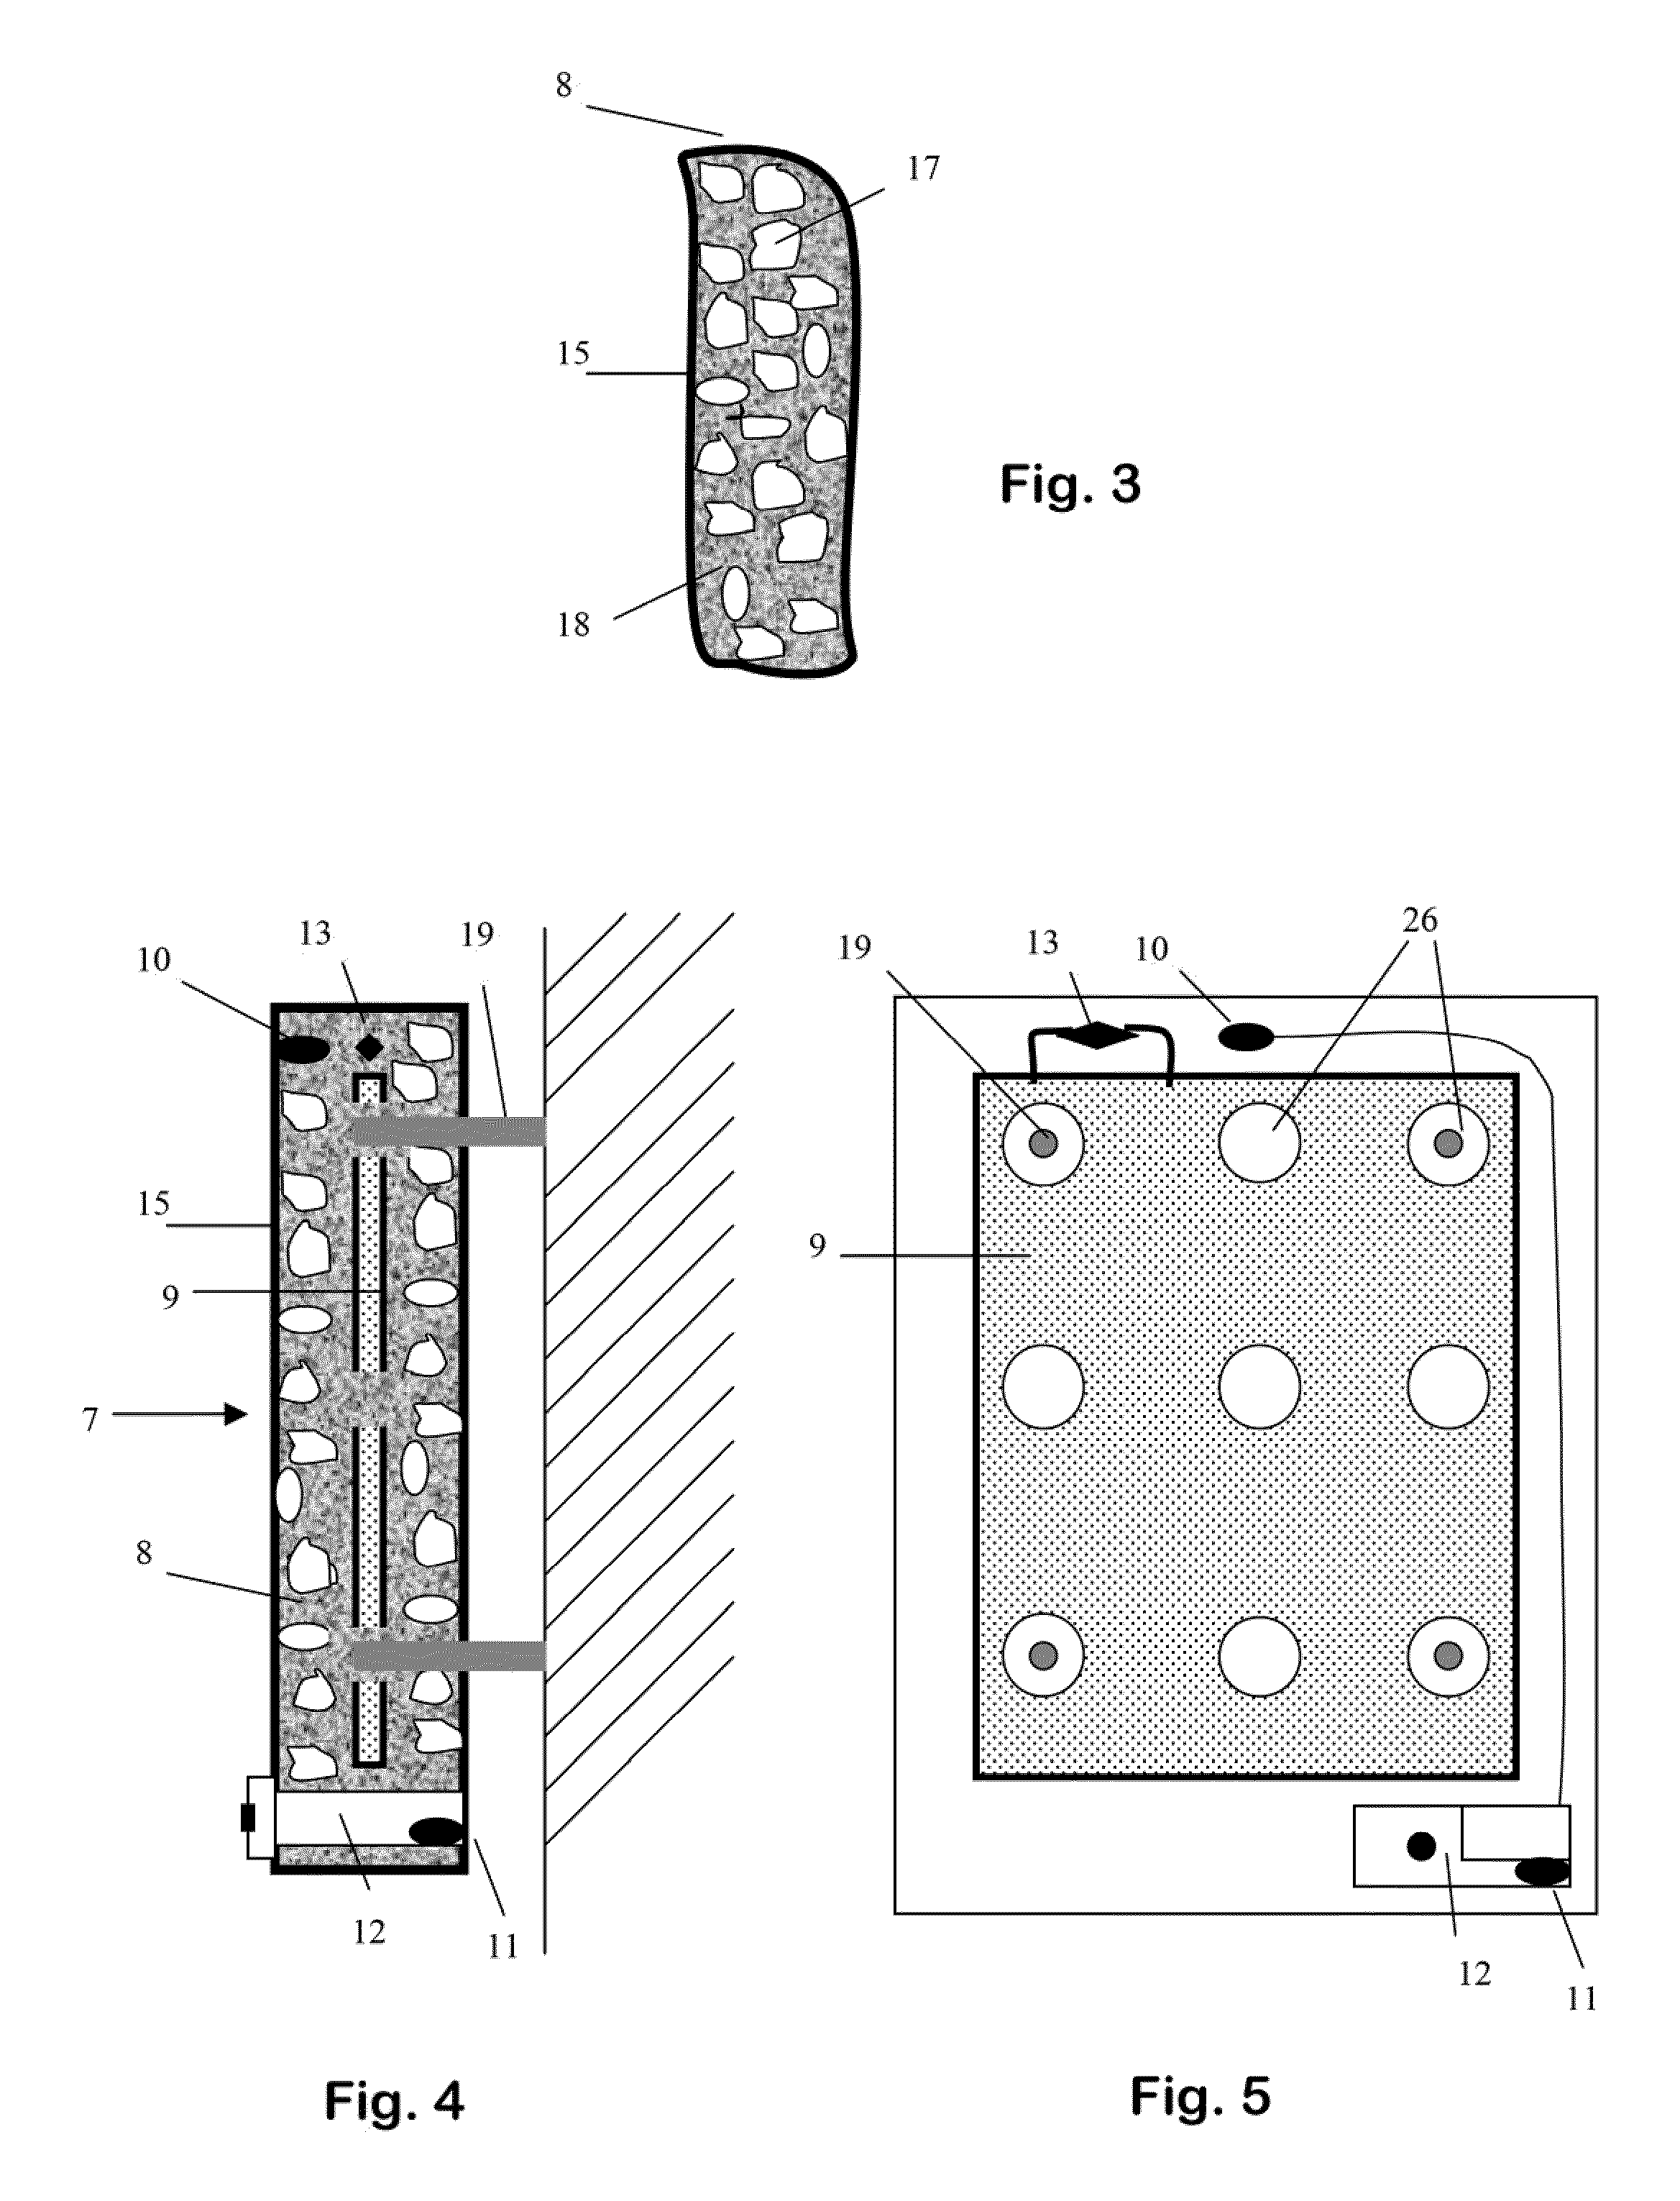 Radiant System for Heat Transfer